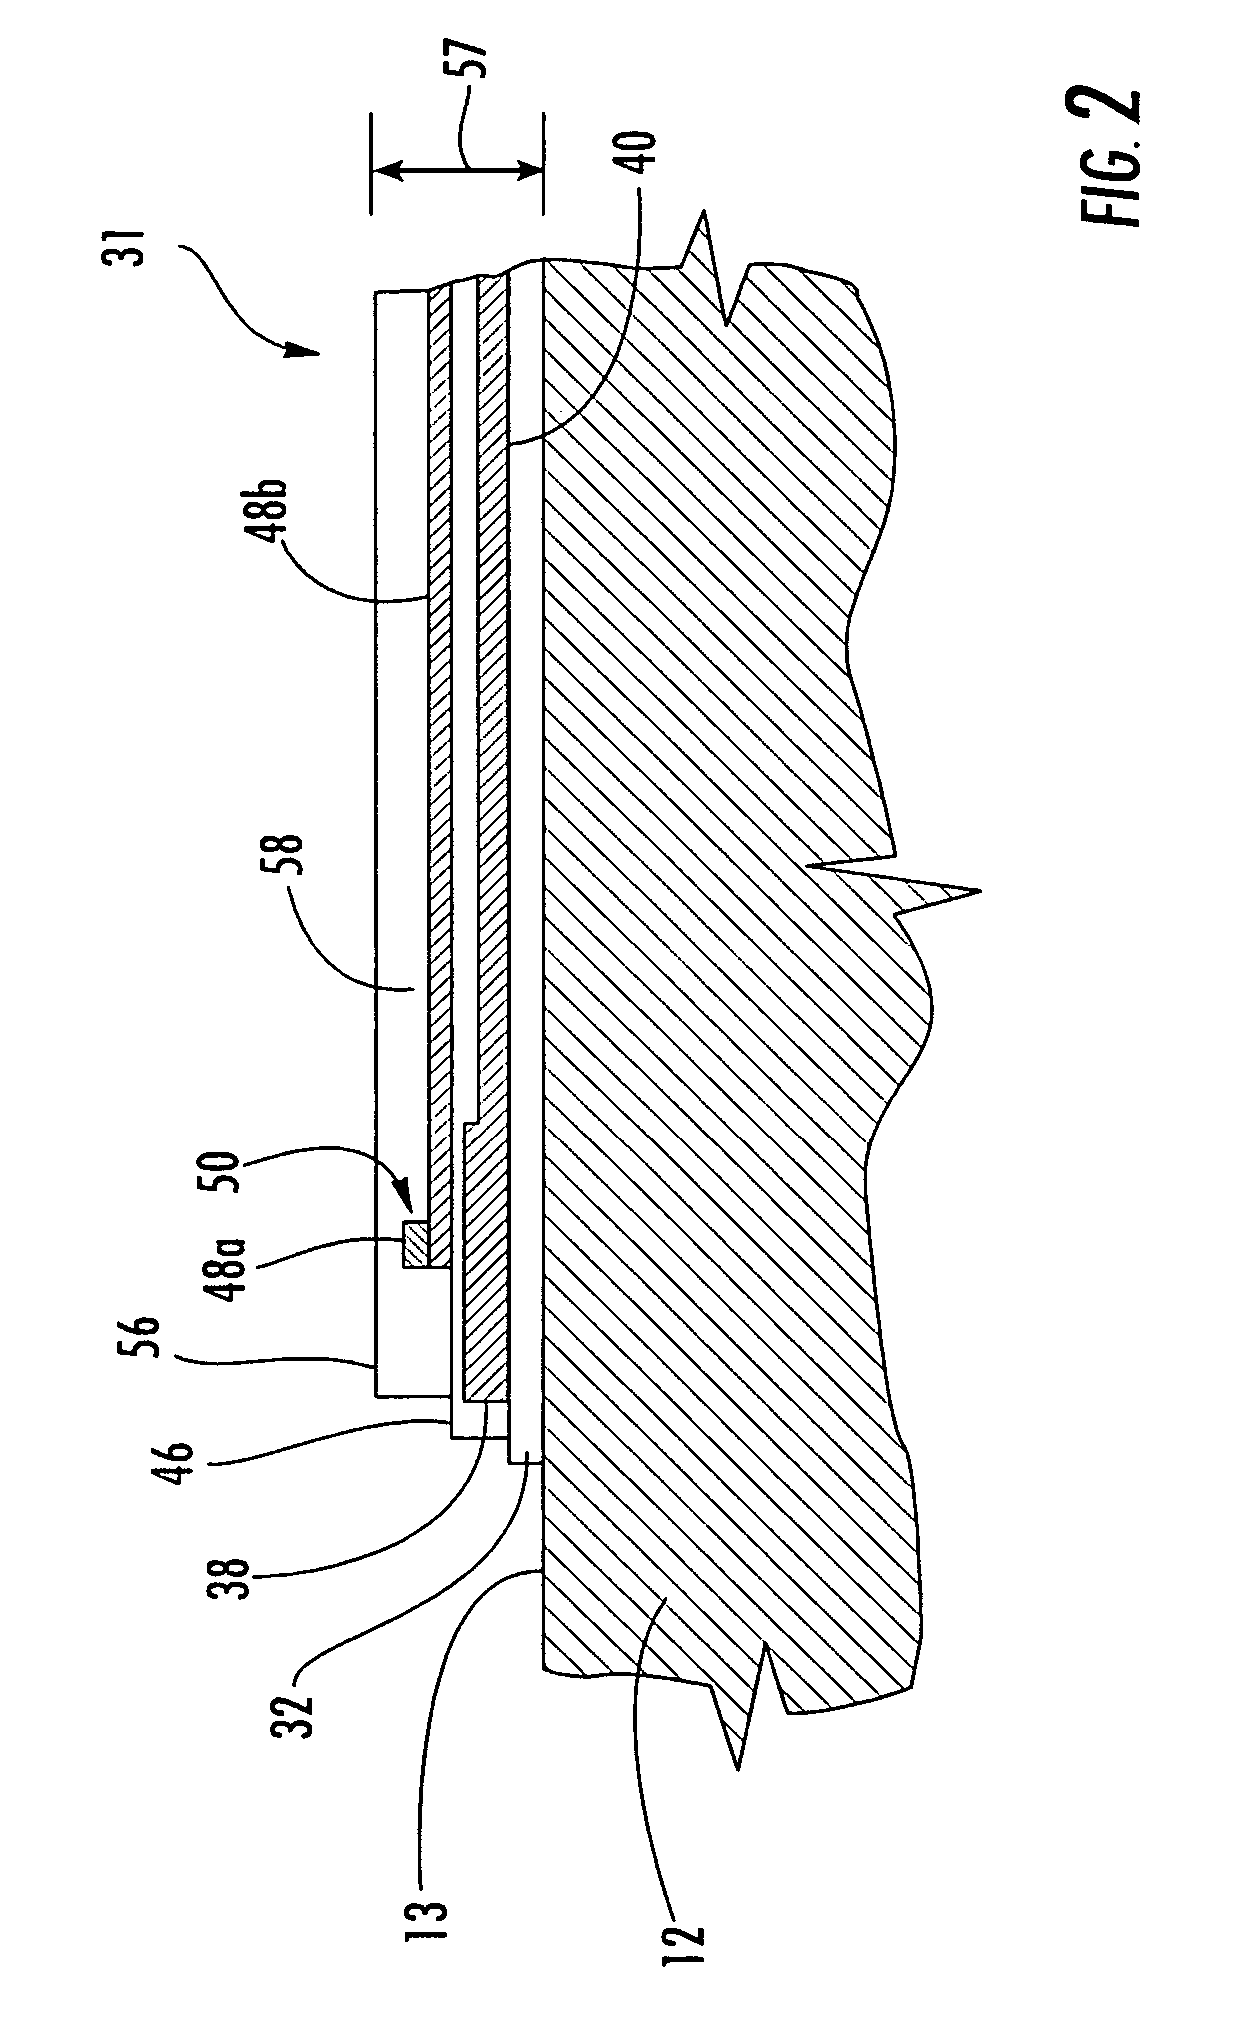 Compressor airfoil surface wetting and icing detection system